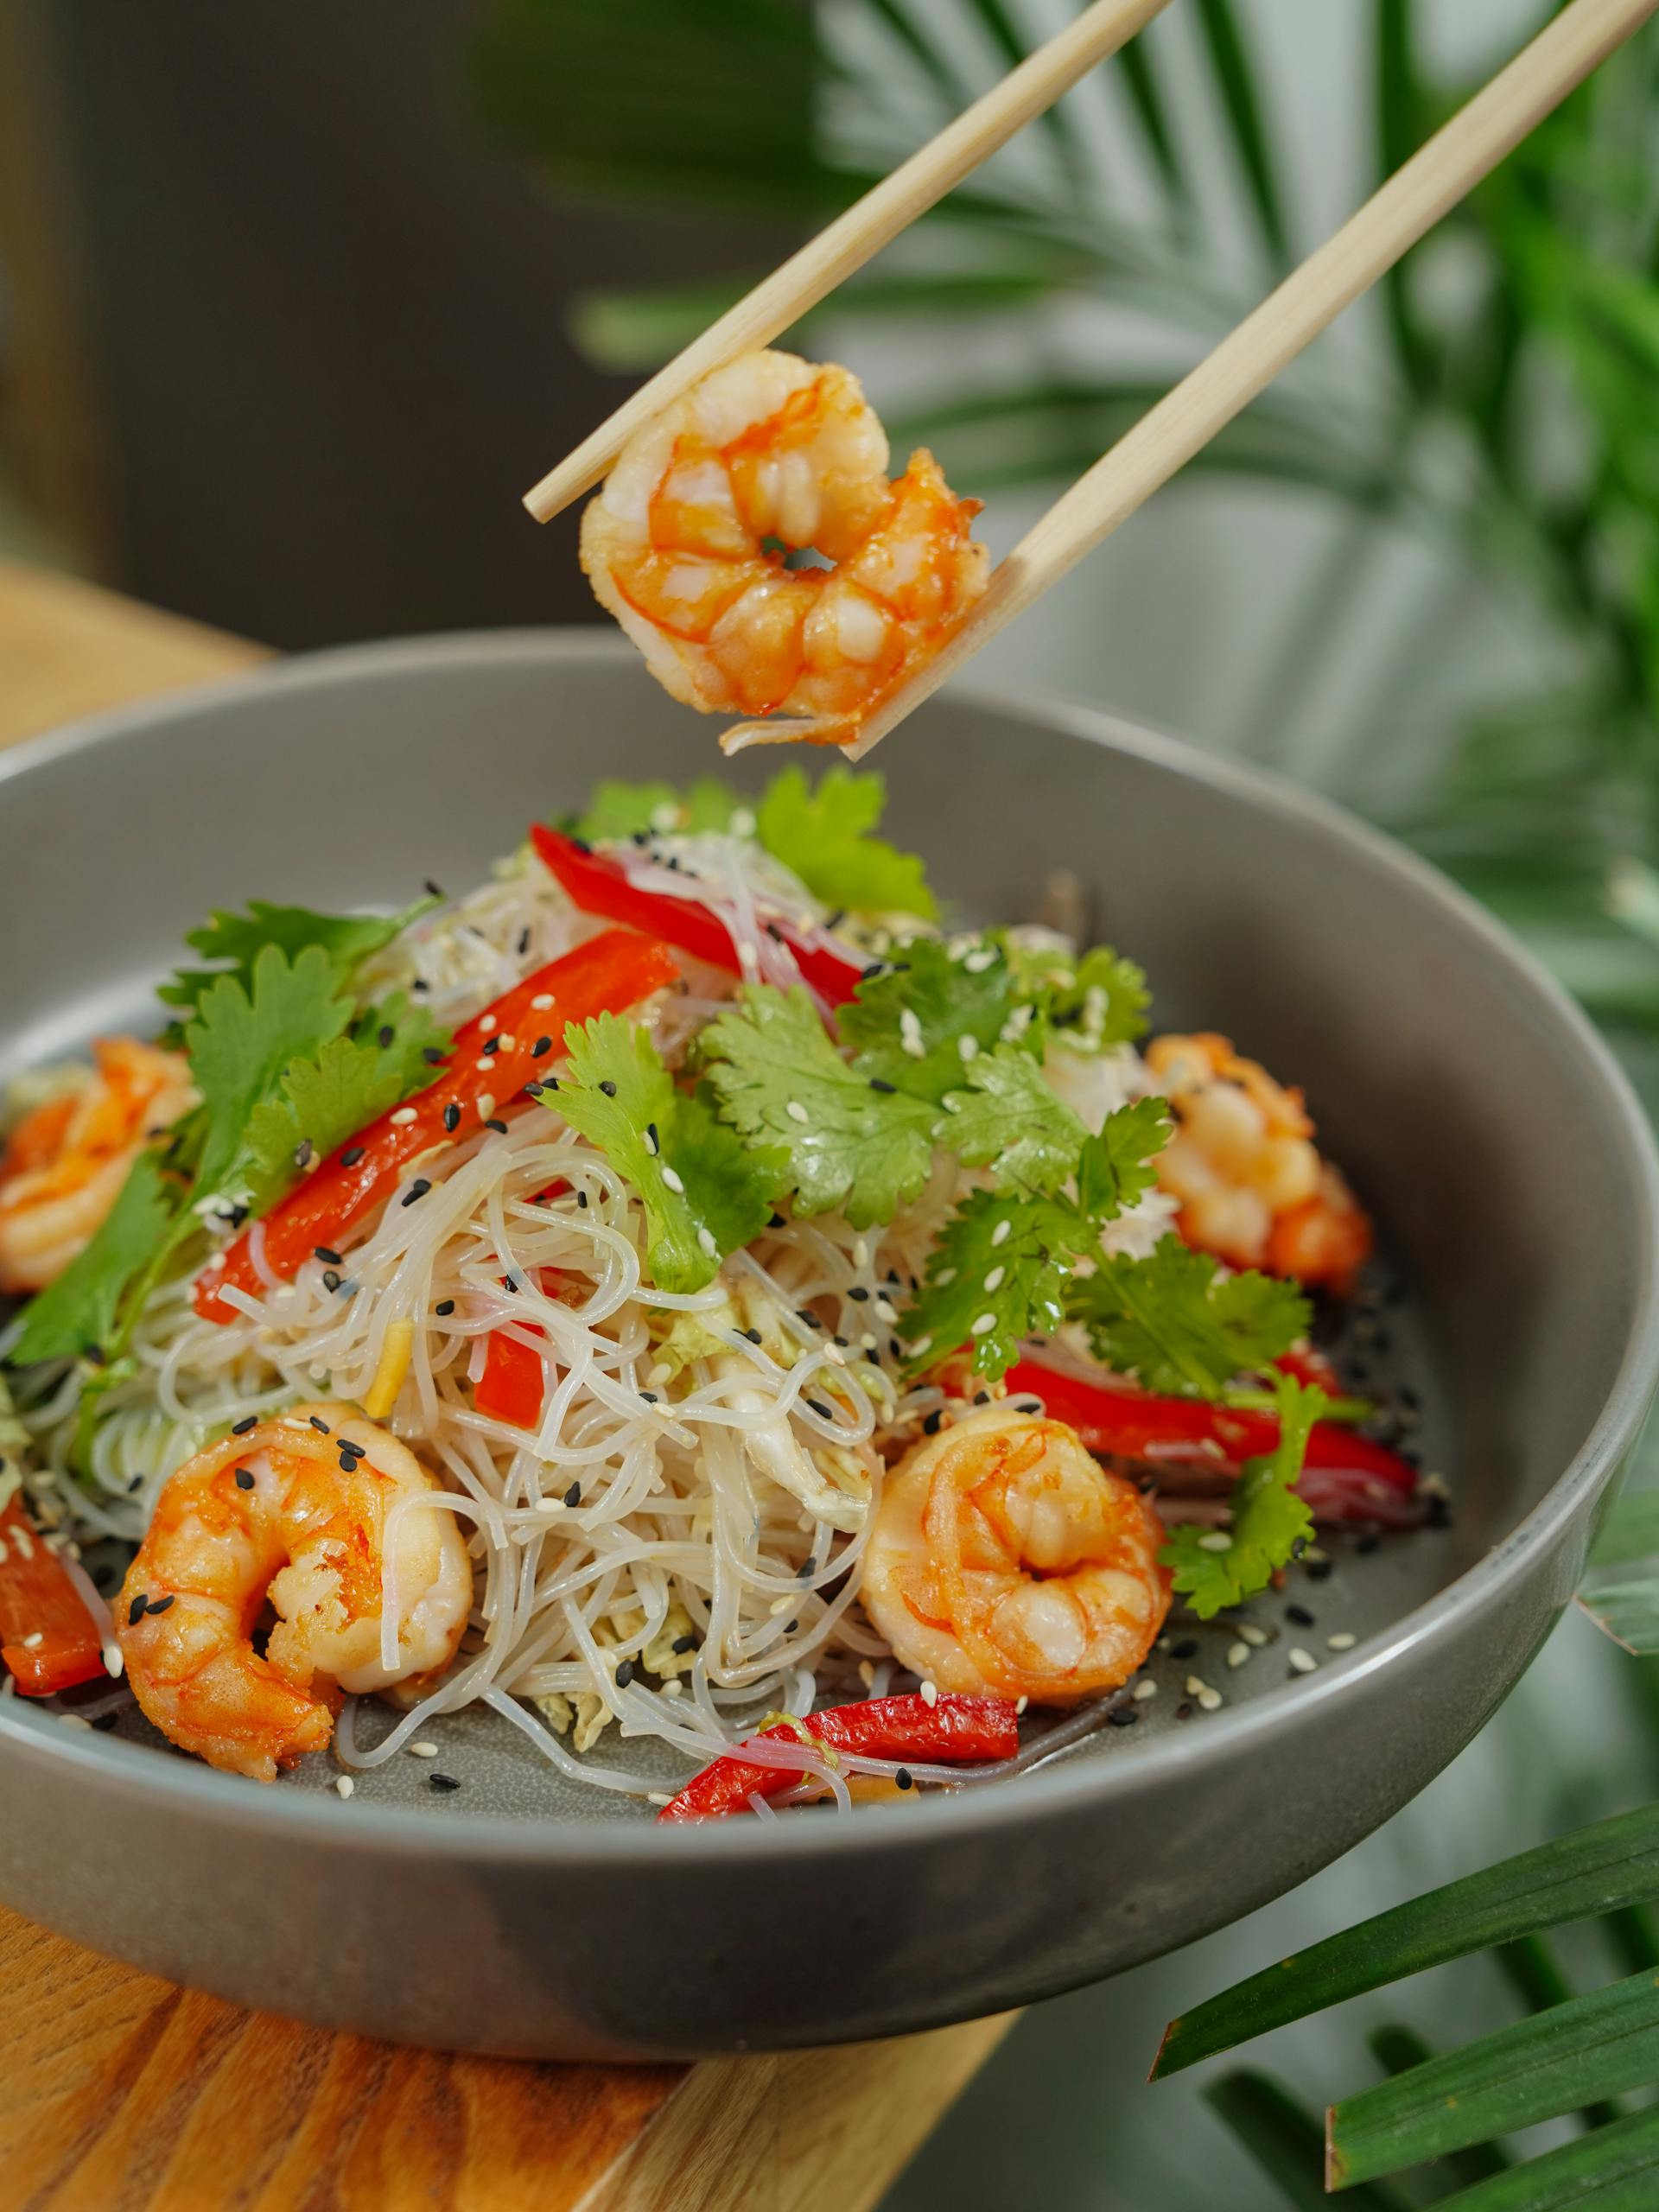 Prawns and noodles in a plate | Source: Pexels